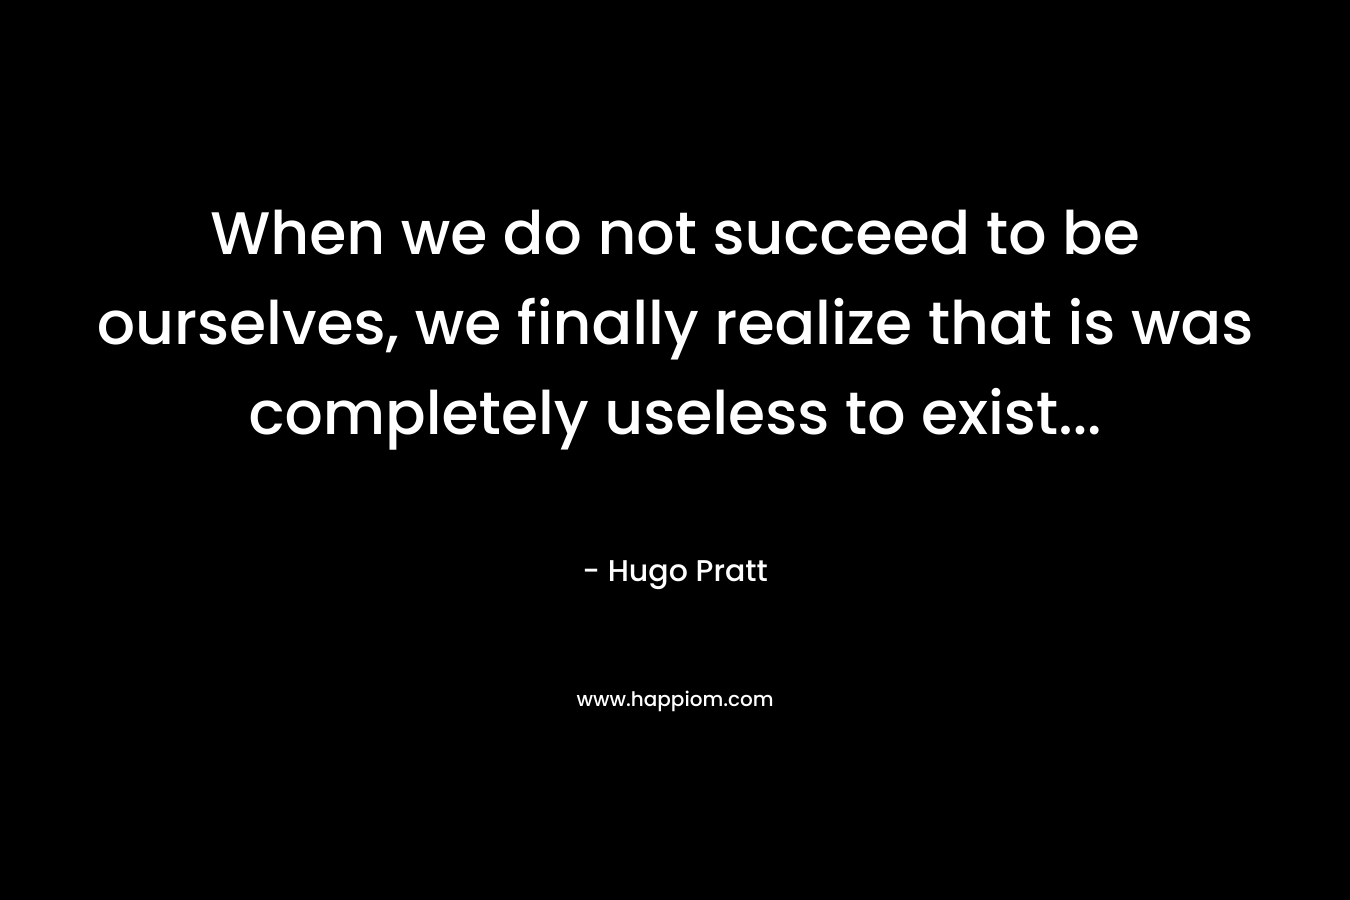 When we do not succeed to be ourselves, we finally realize that is was completely useless to exist...